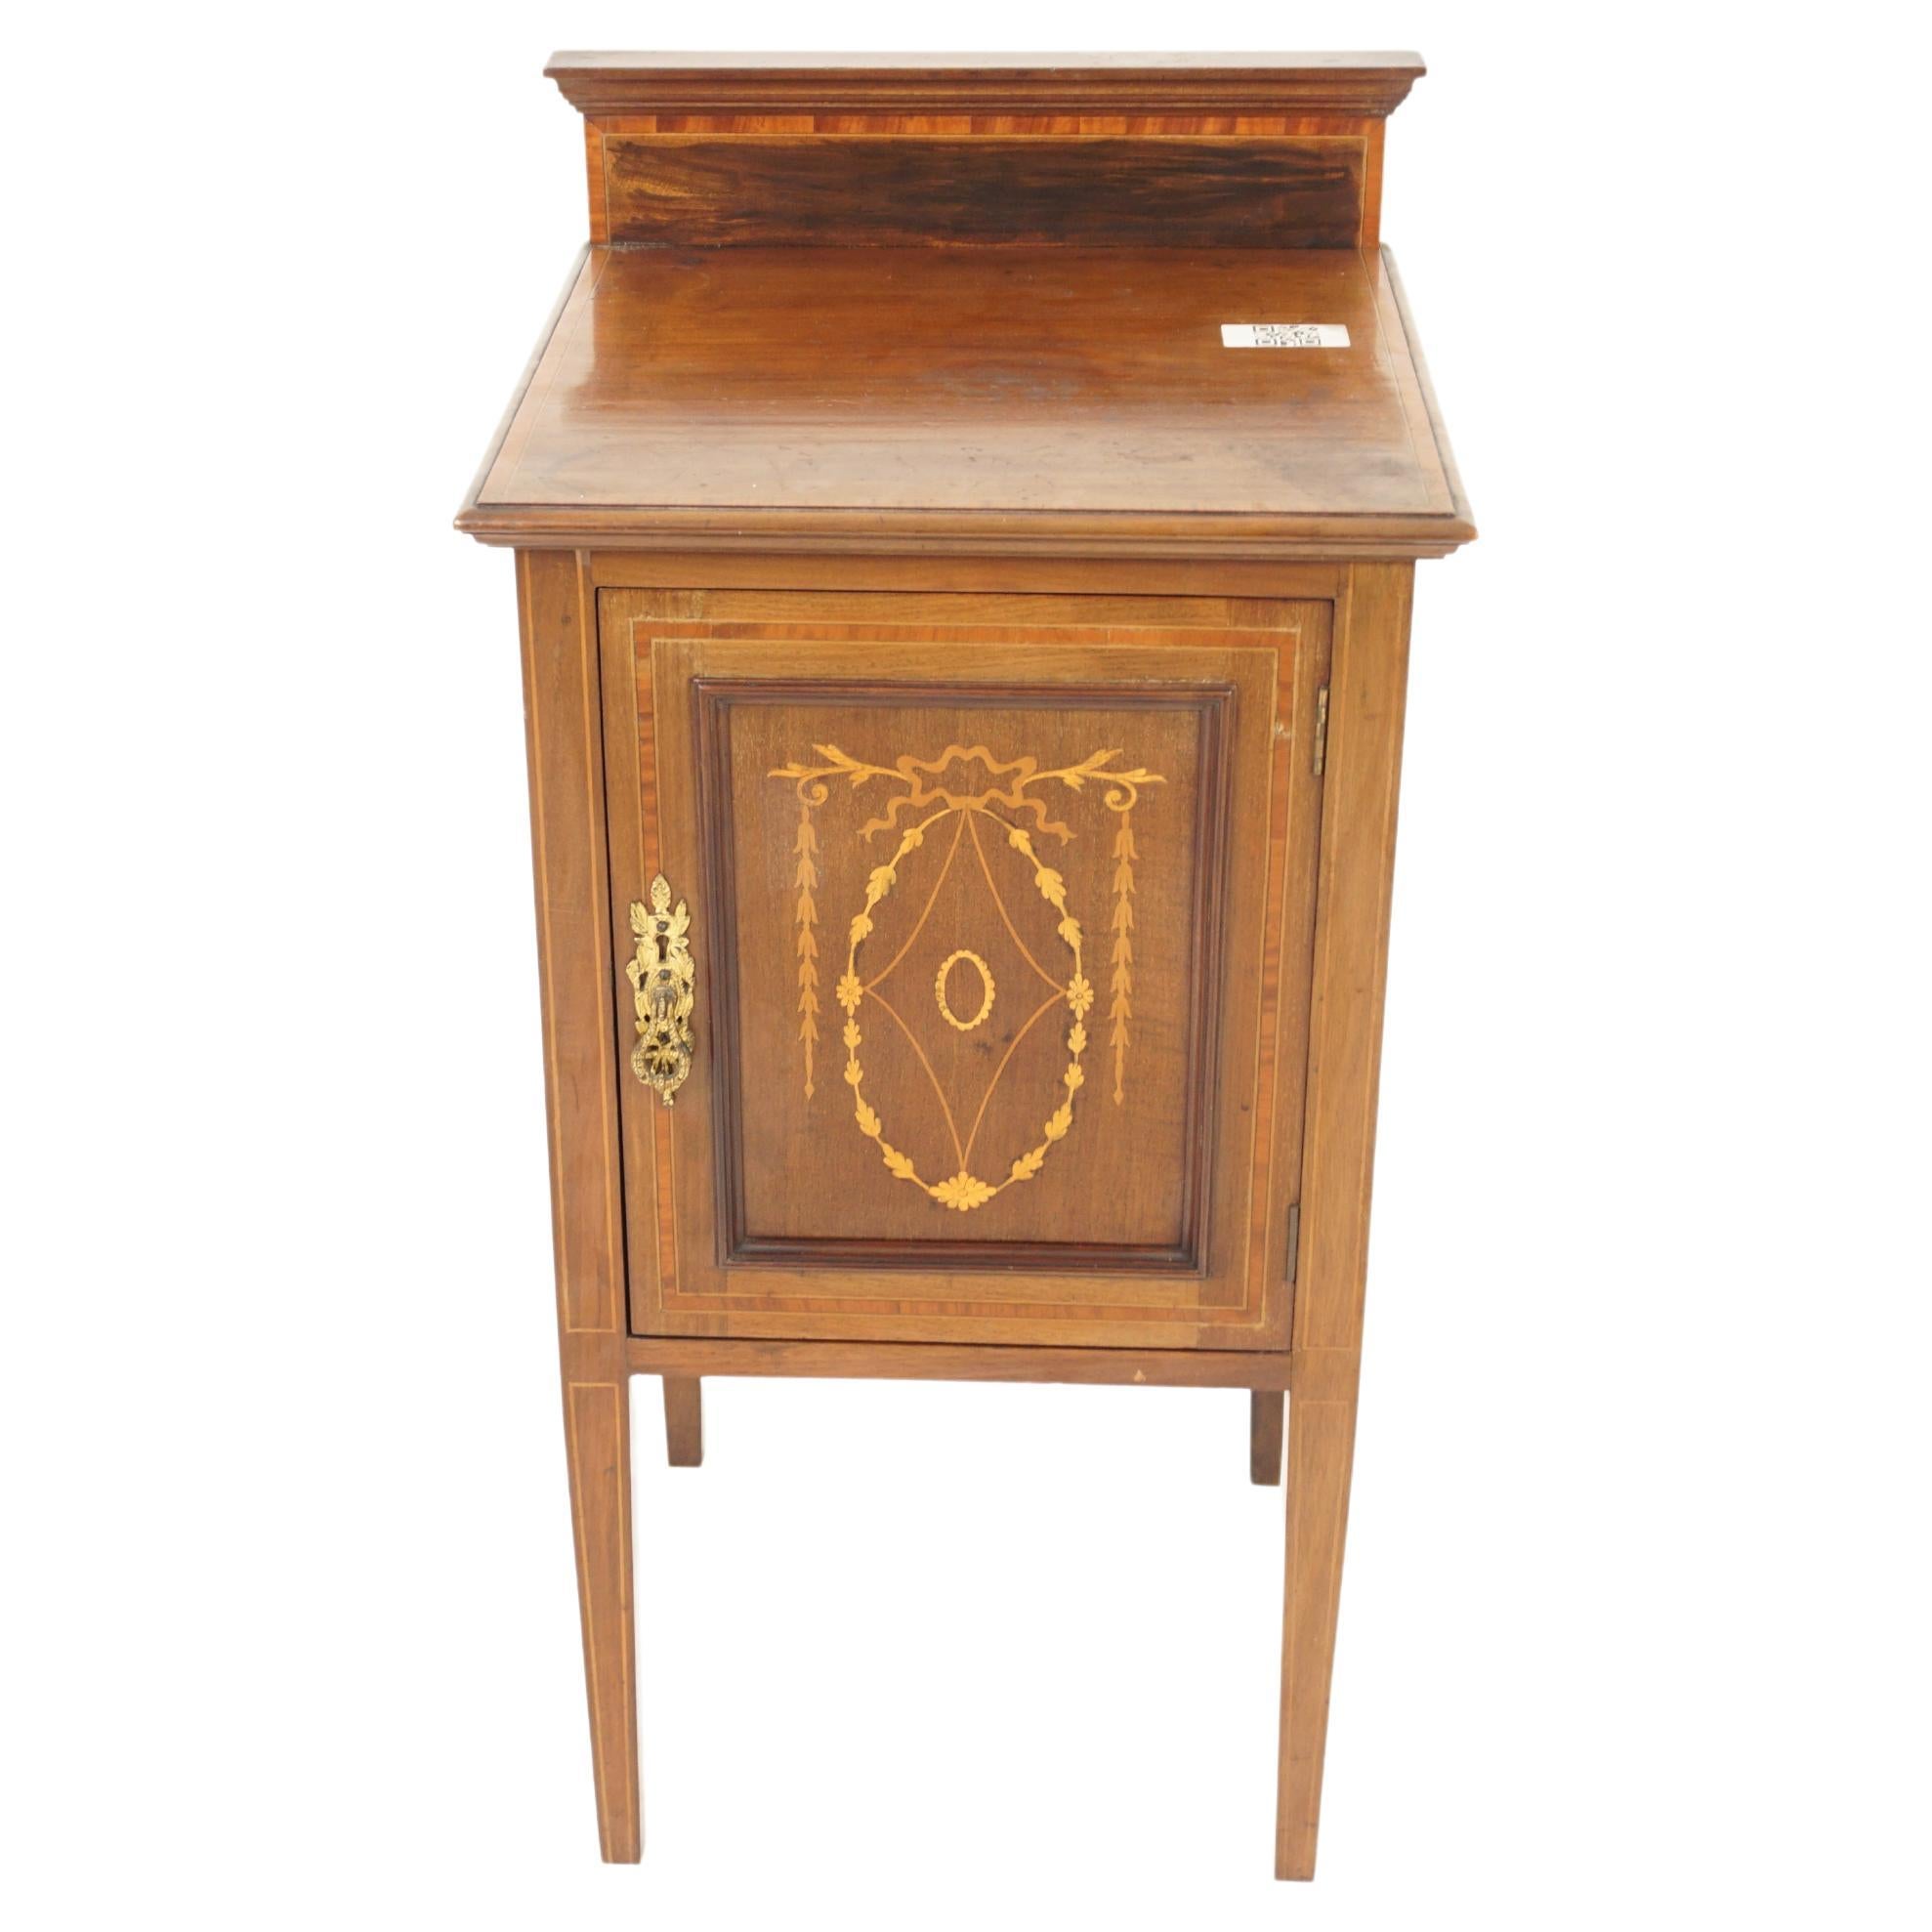 Antique Inlaid Walnut Nightstand, Sheraton Bedside Table, Scotland 1900, H969 For Sale